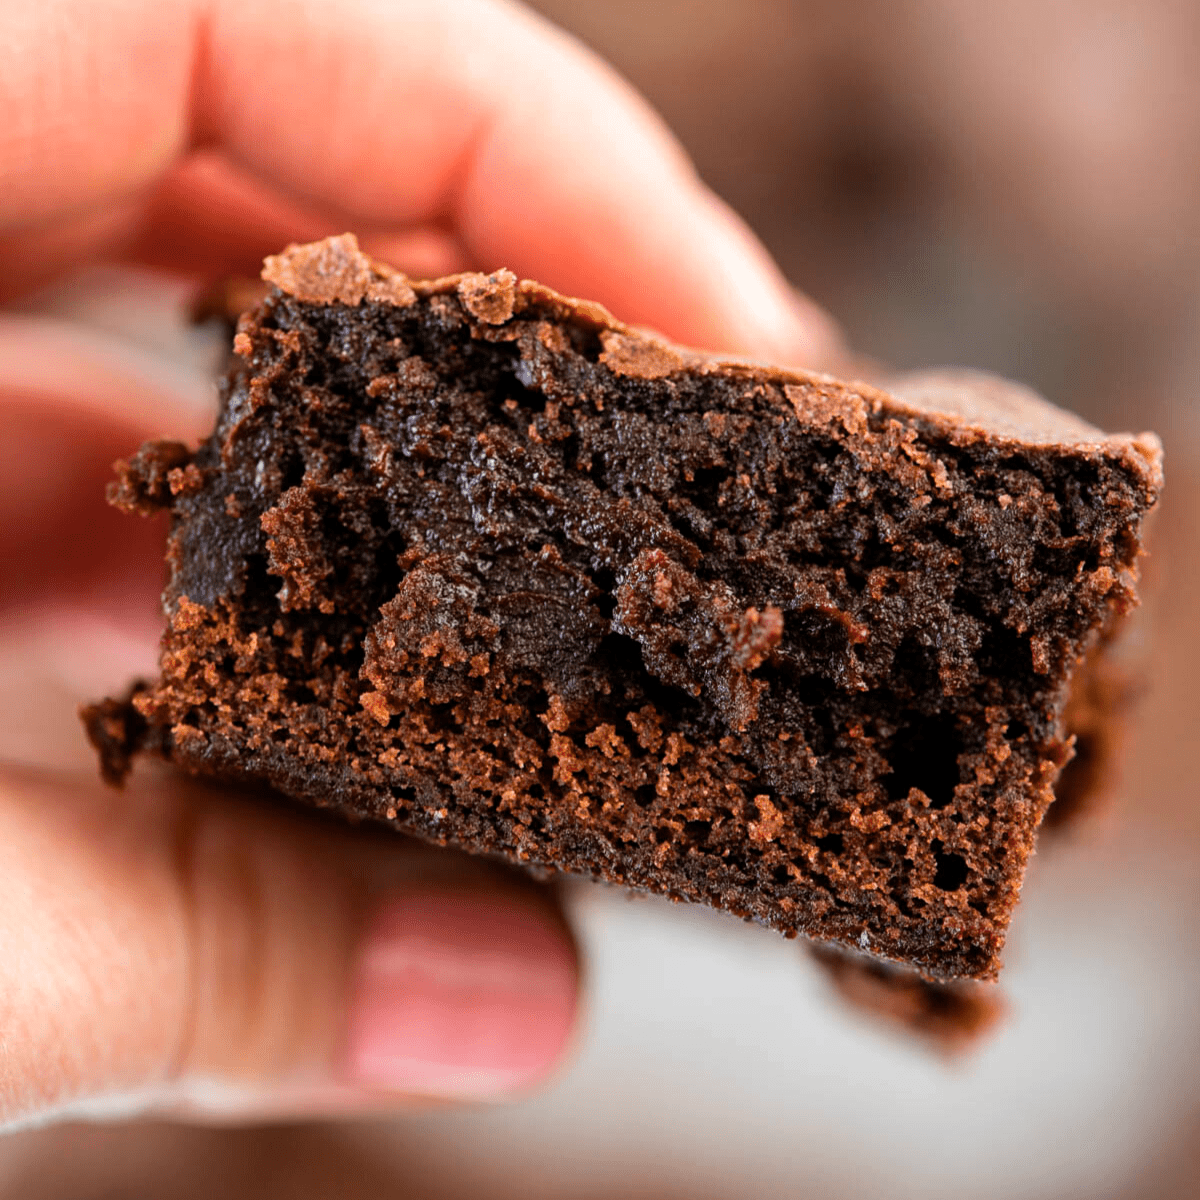 https://thefirstyearblog.com/wp-content/uploads/2013/10/box-brownies-made-better-square-2022.png